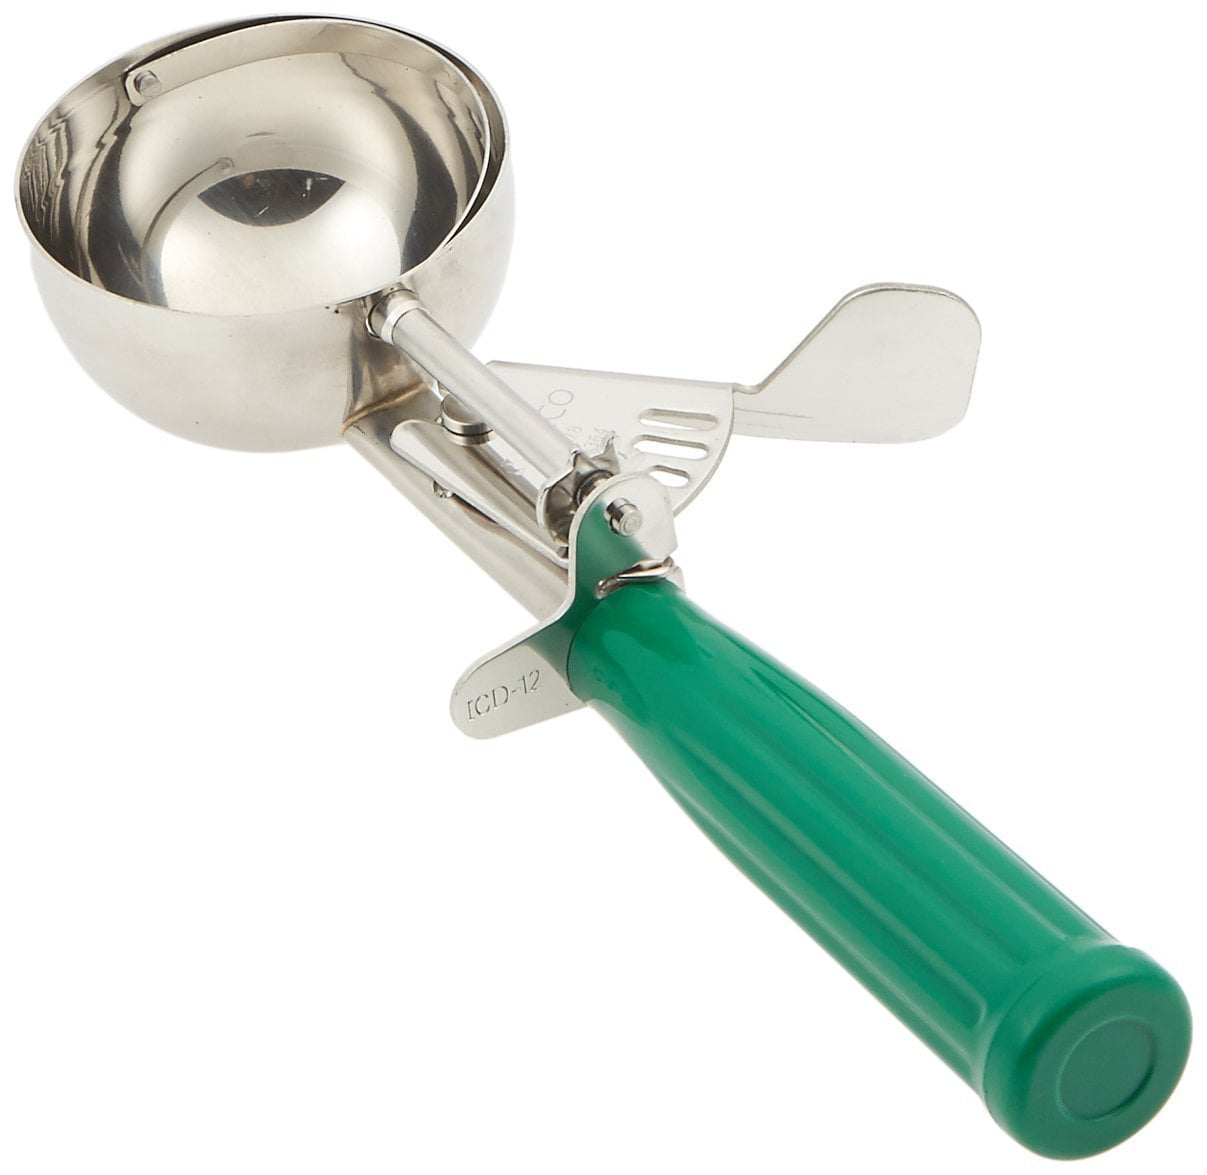 Save on ChefSelect Ice Cream Scoop Order Online Delivery